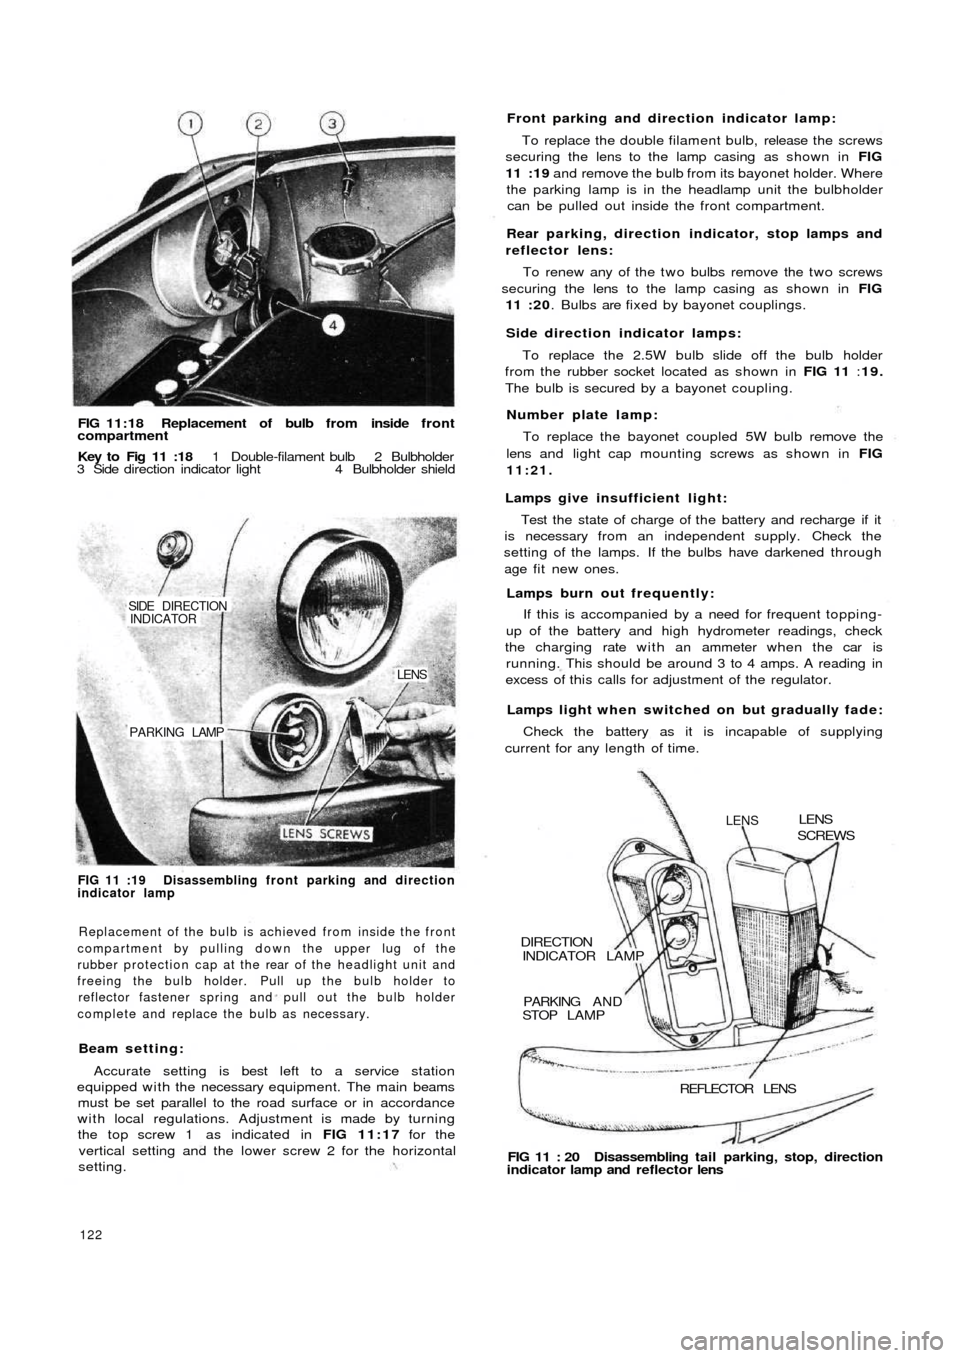 FIAT 500 1967 1.G Workshop Manual FIG 11:18 Replacement of bulb from inside f r o n tcompartment
Key to  Fig 11 :18 1 Double-filament bulb 2 Bulbholder
3 Side direction indicator light 4 Bulbholder shield
PARKING LAMP
LENS
SIDE  DIREC